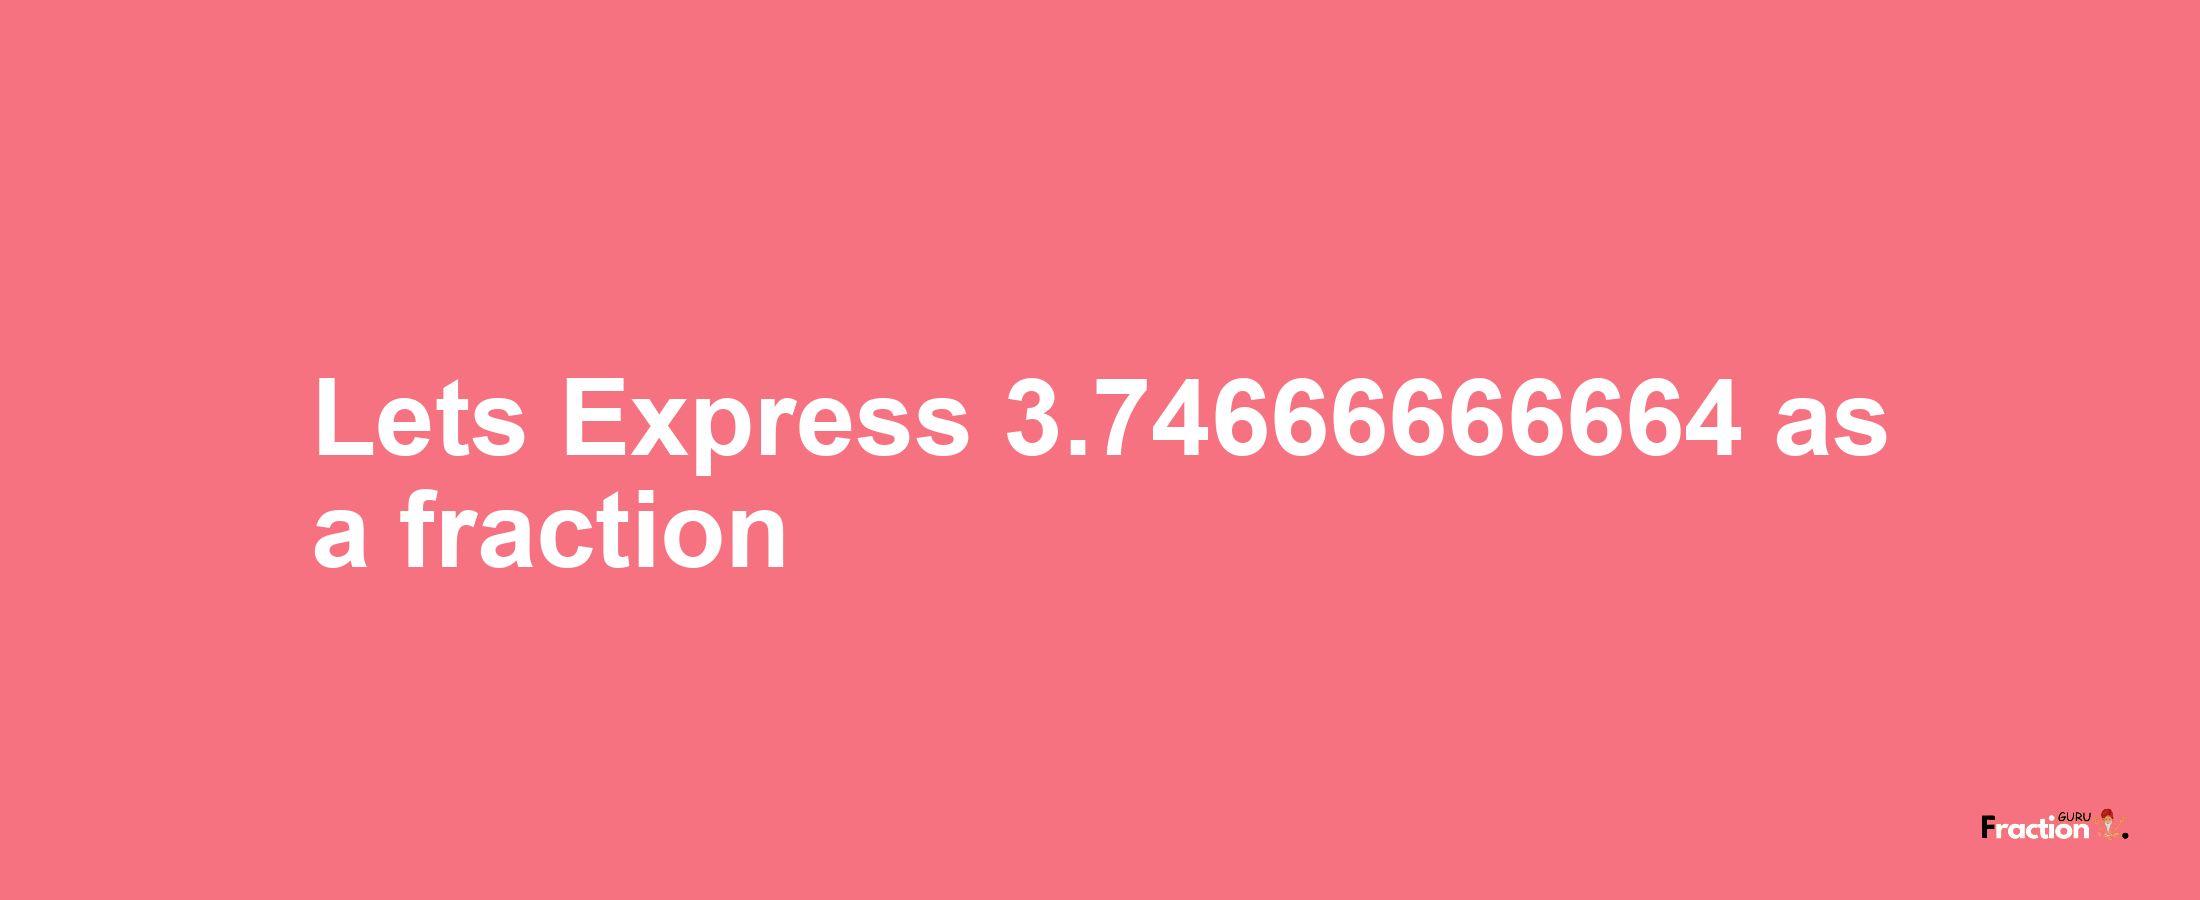 Lets Express 3.74666666664 as afraction